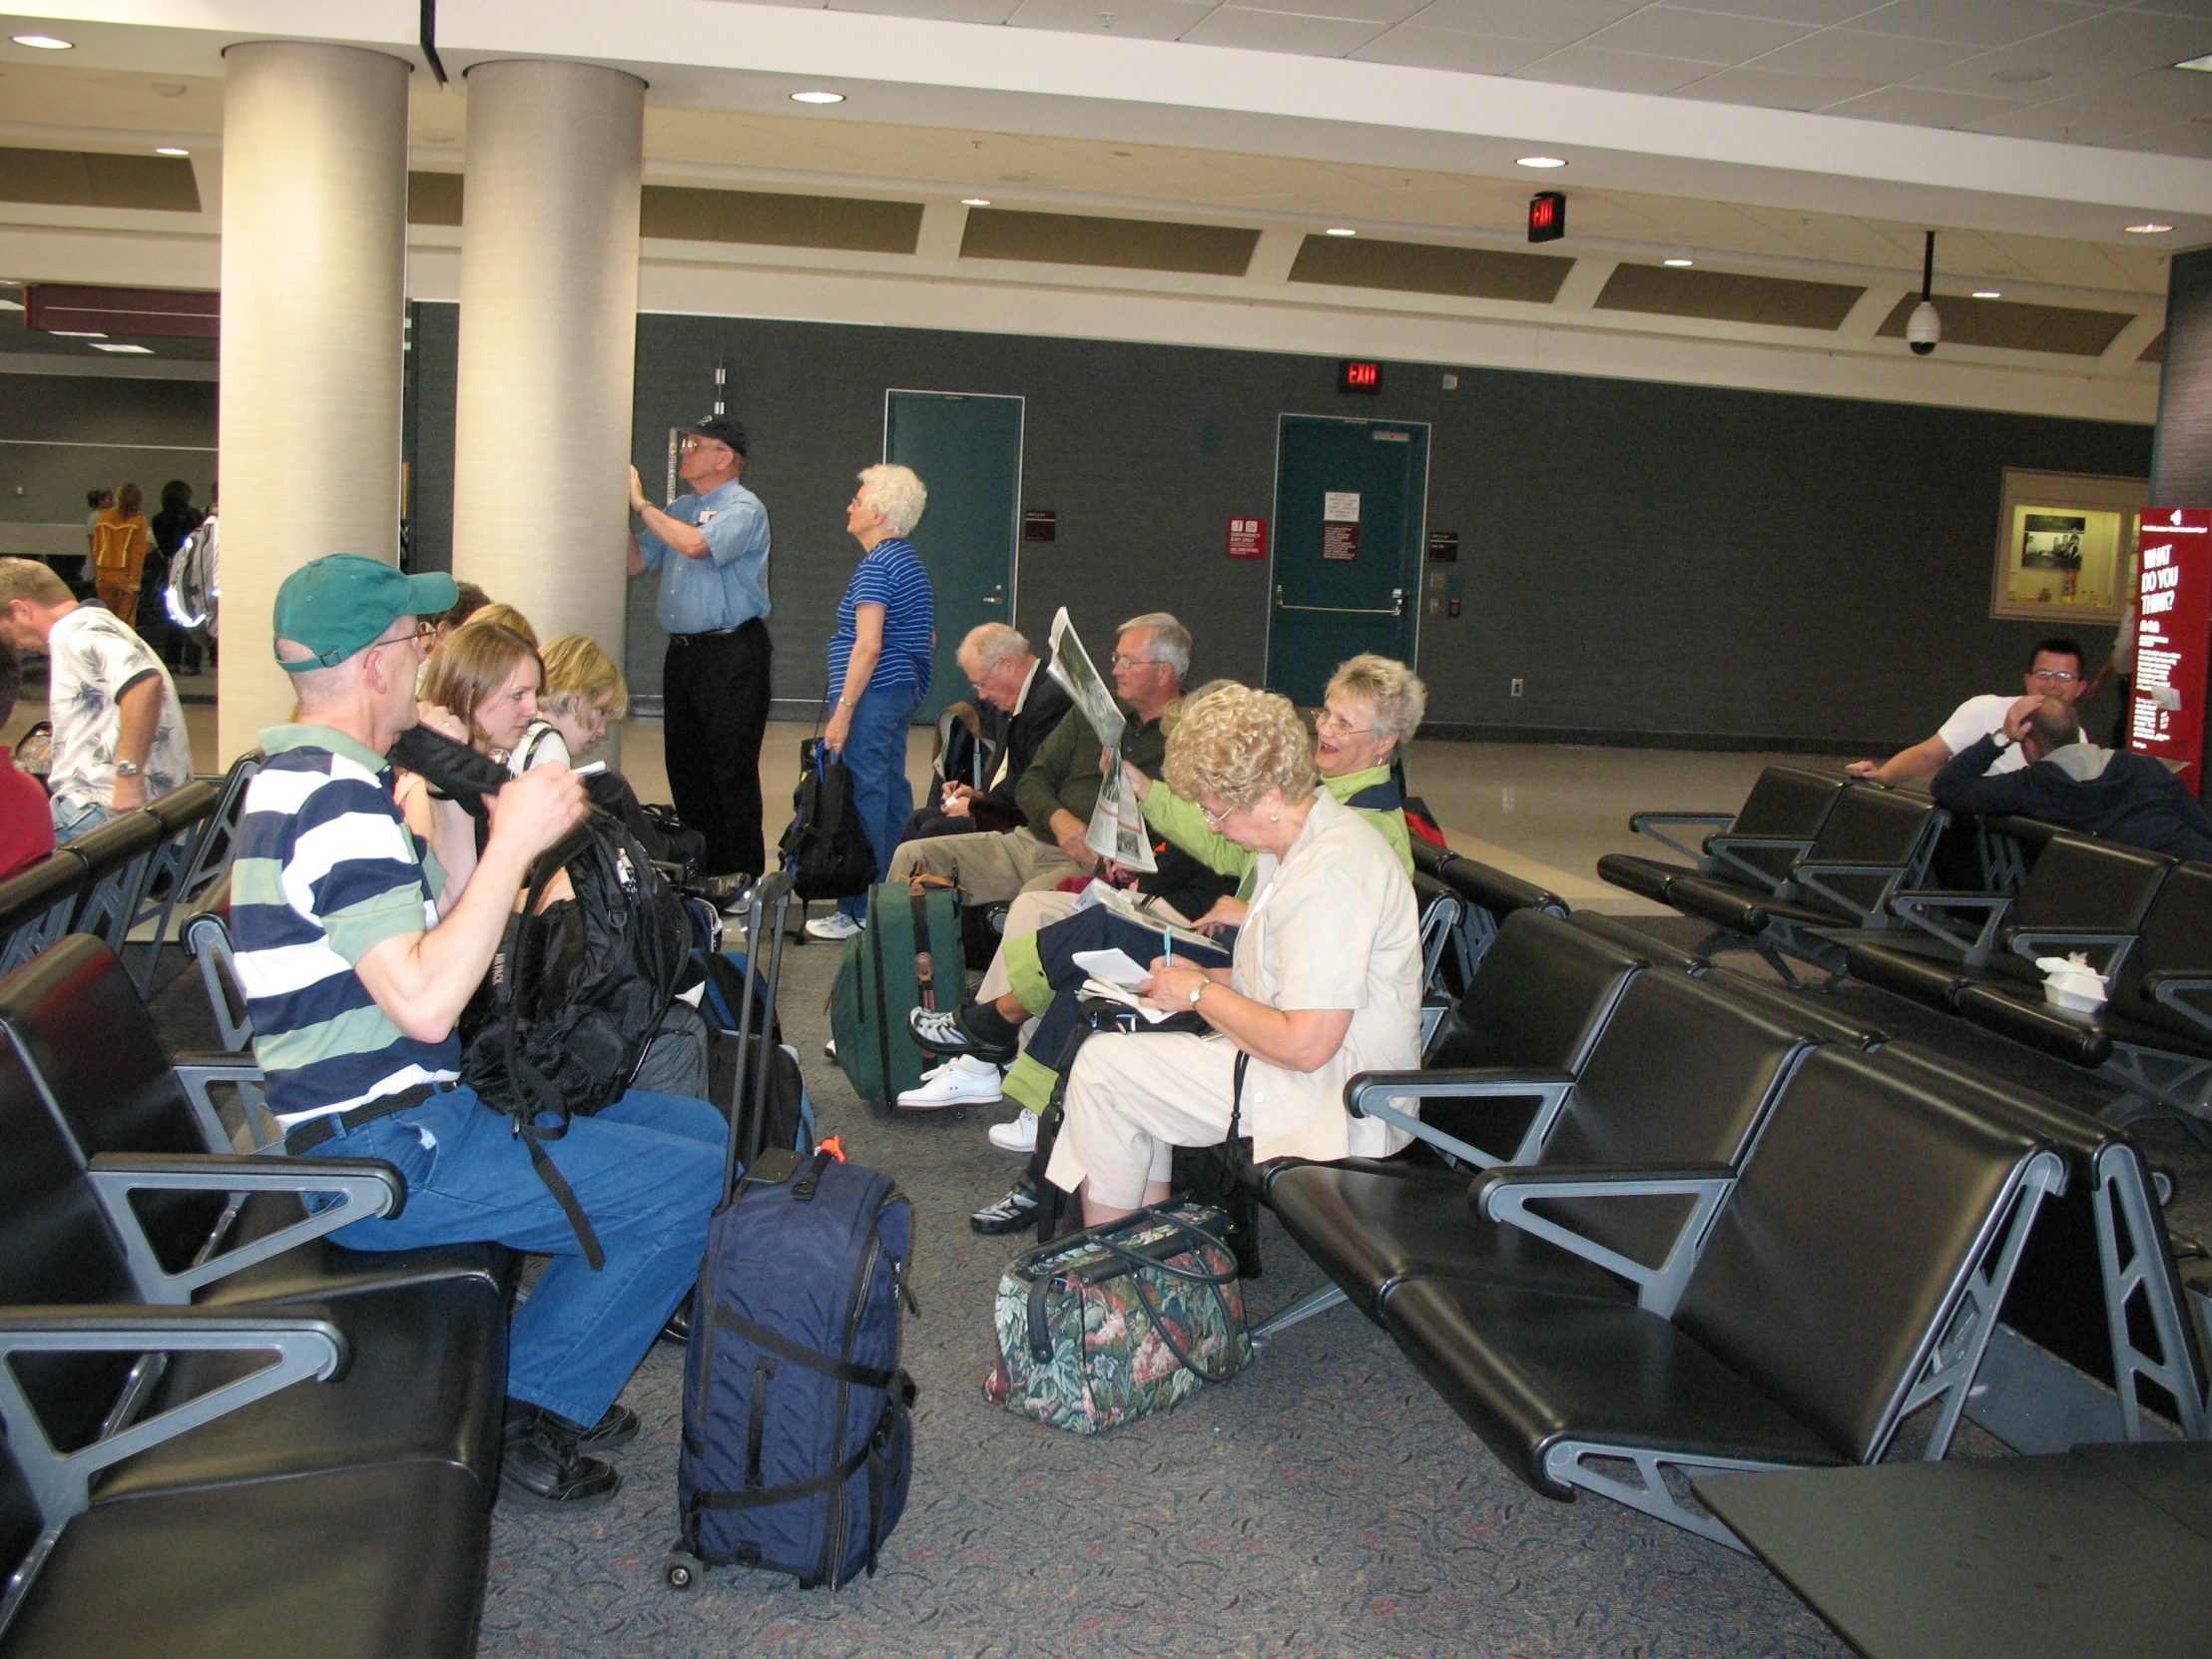 people are waiting in an airport waiting to board